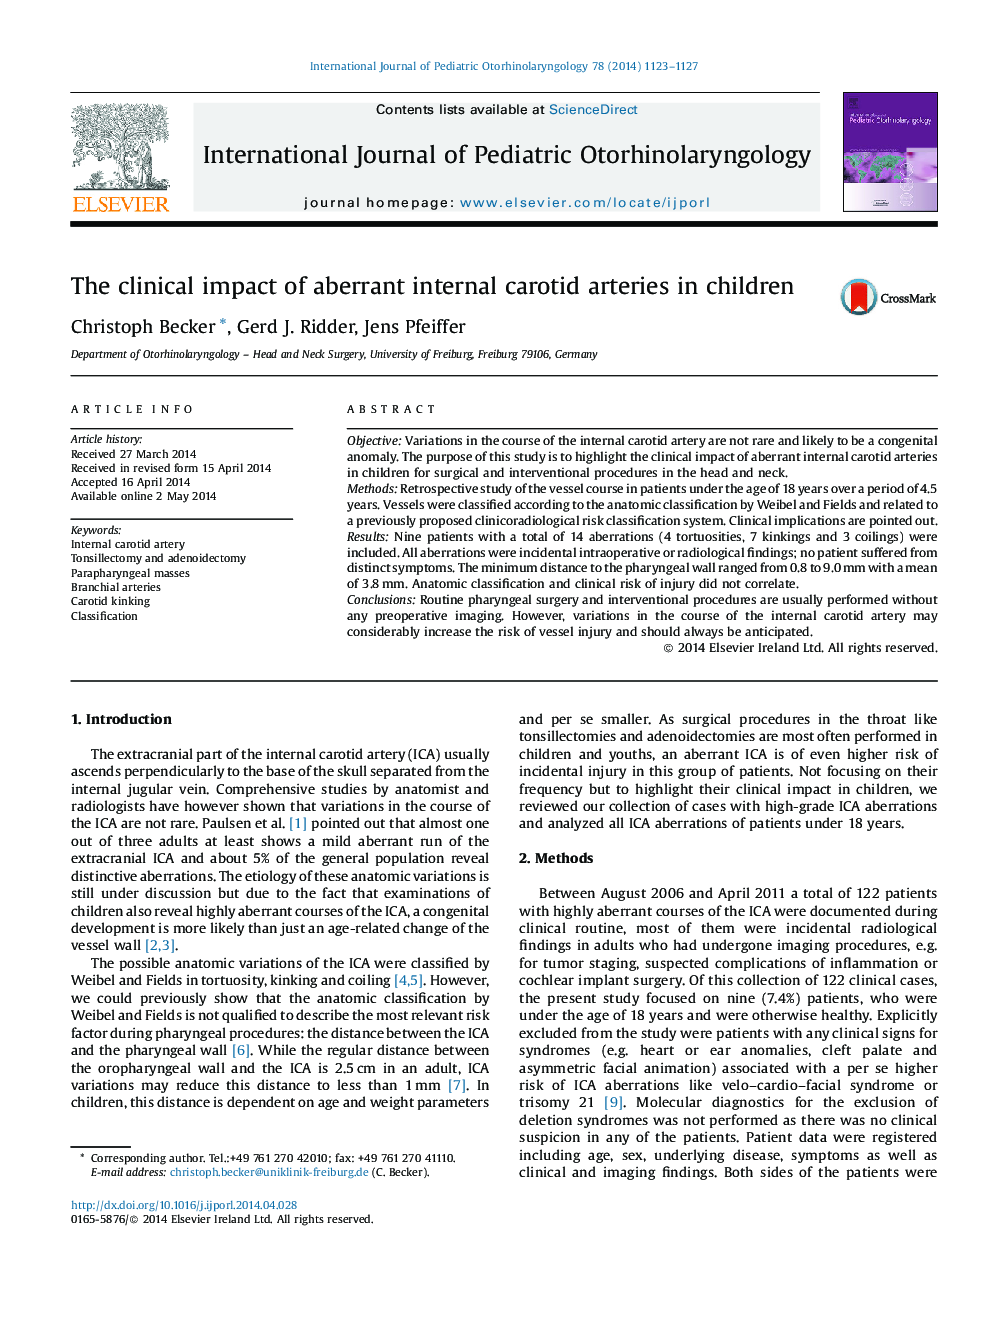 The clinical impact of aberrant internal carotid arteries in children